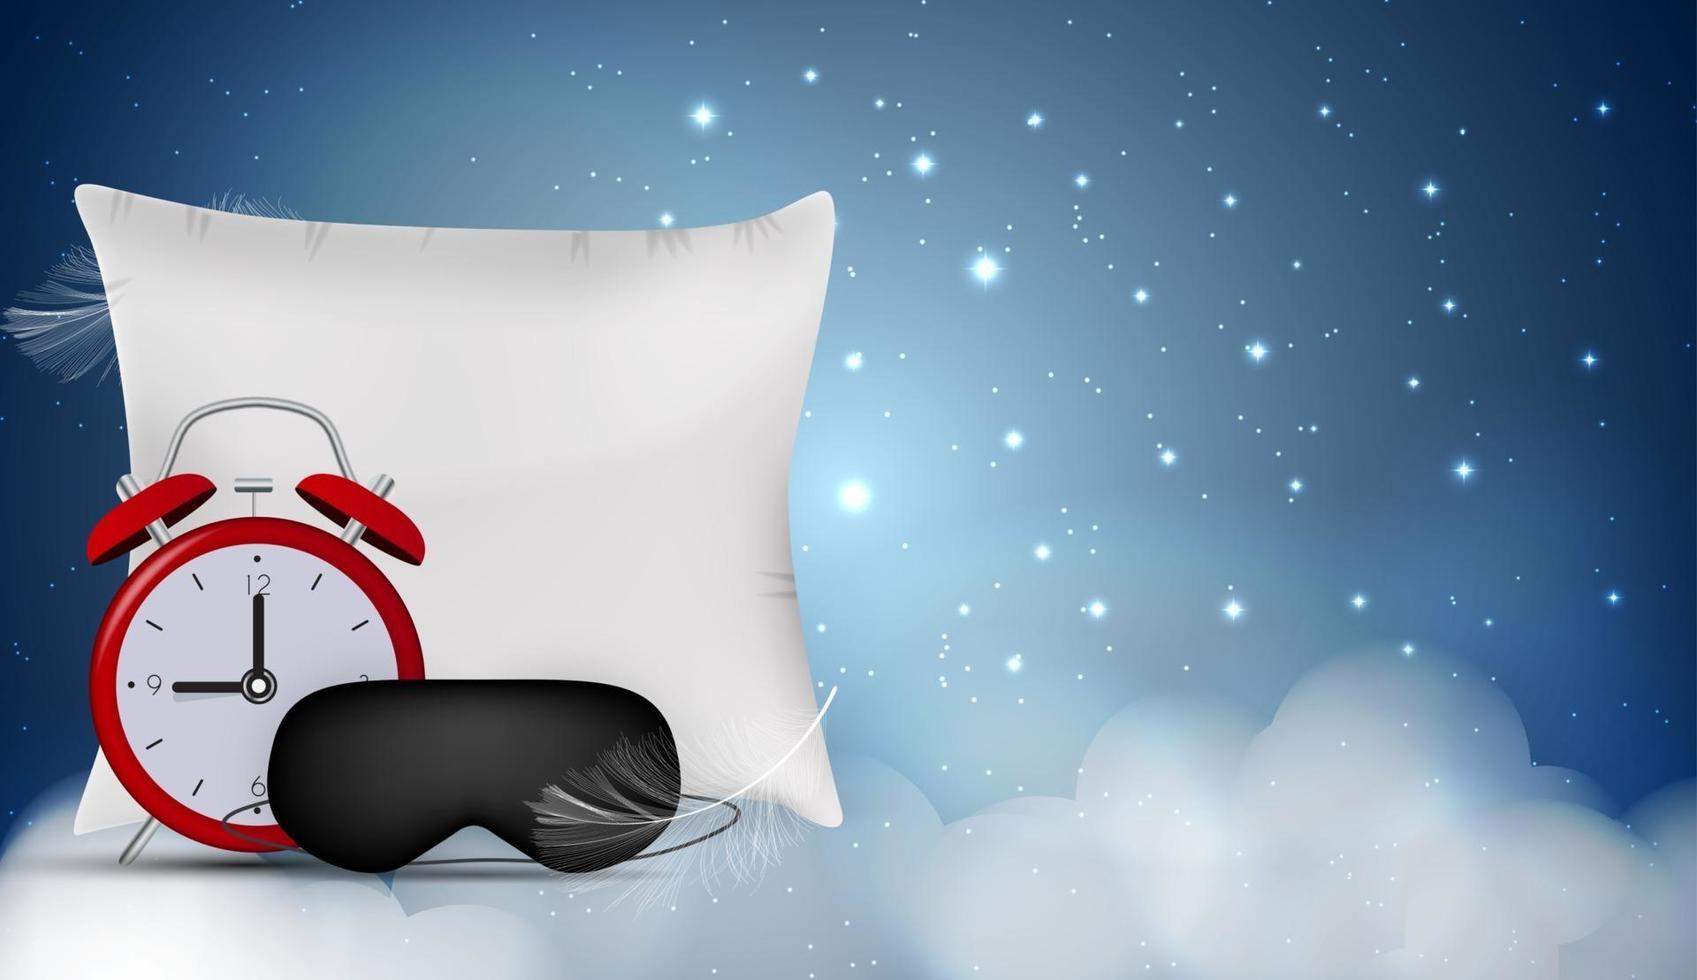 Good Night Abstract Background with Funny Sleeping Mask, alarm clock and pillow. Vector Illustration